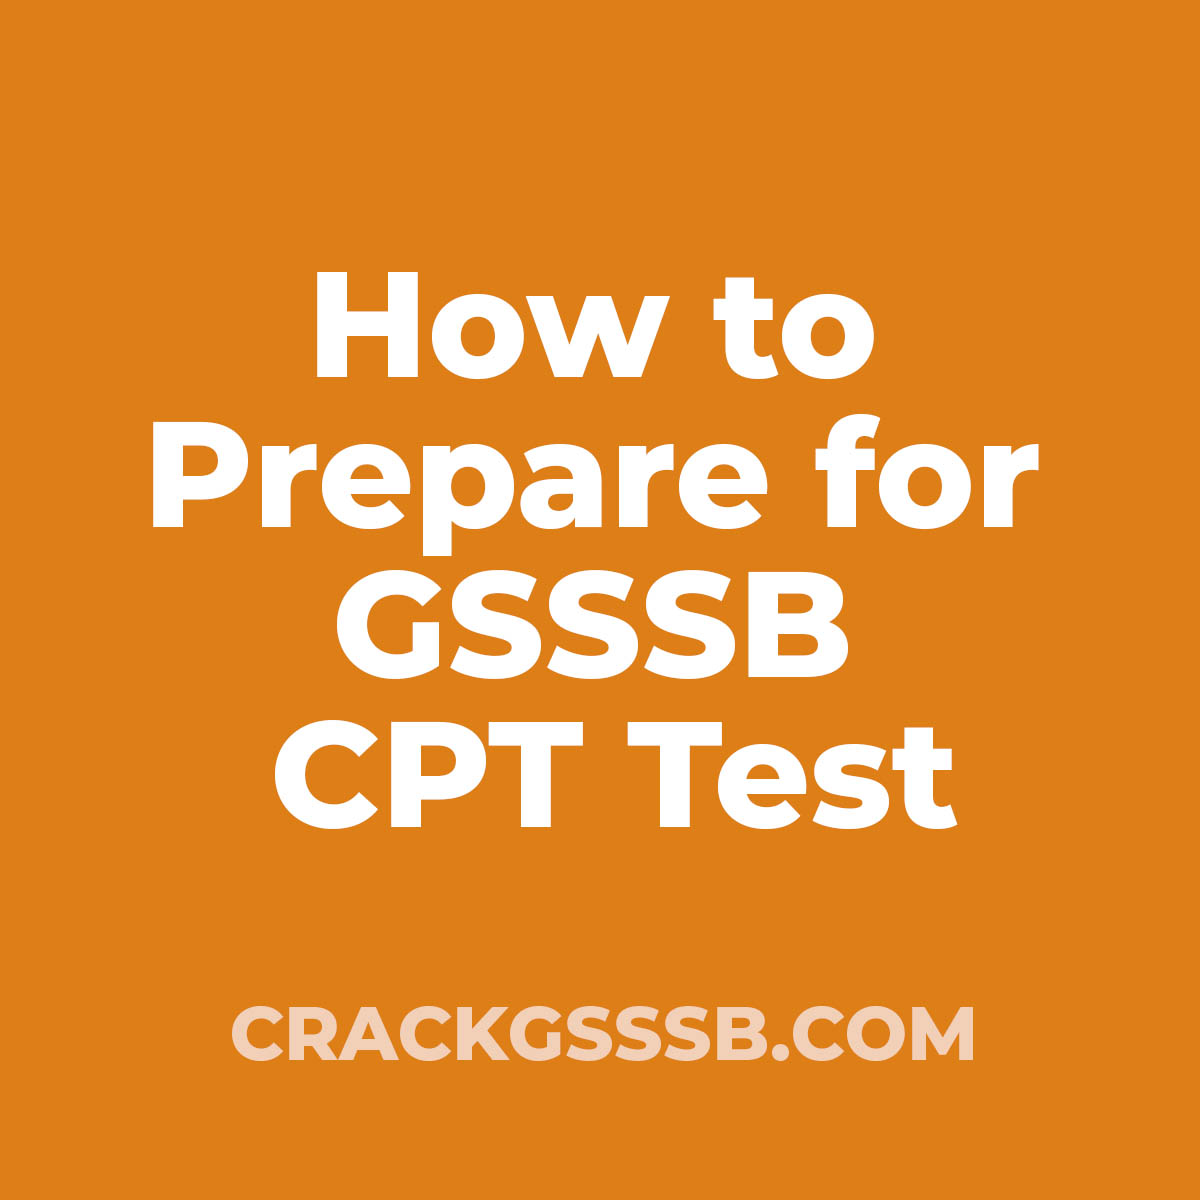 how-to-prepare-for-gsssb-cpt-test-crackgsssb